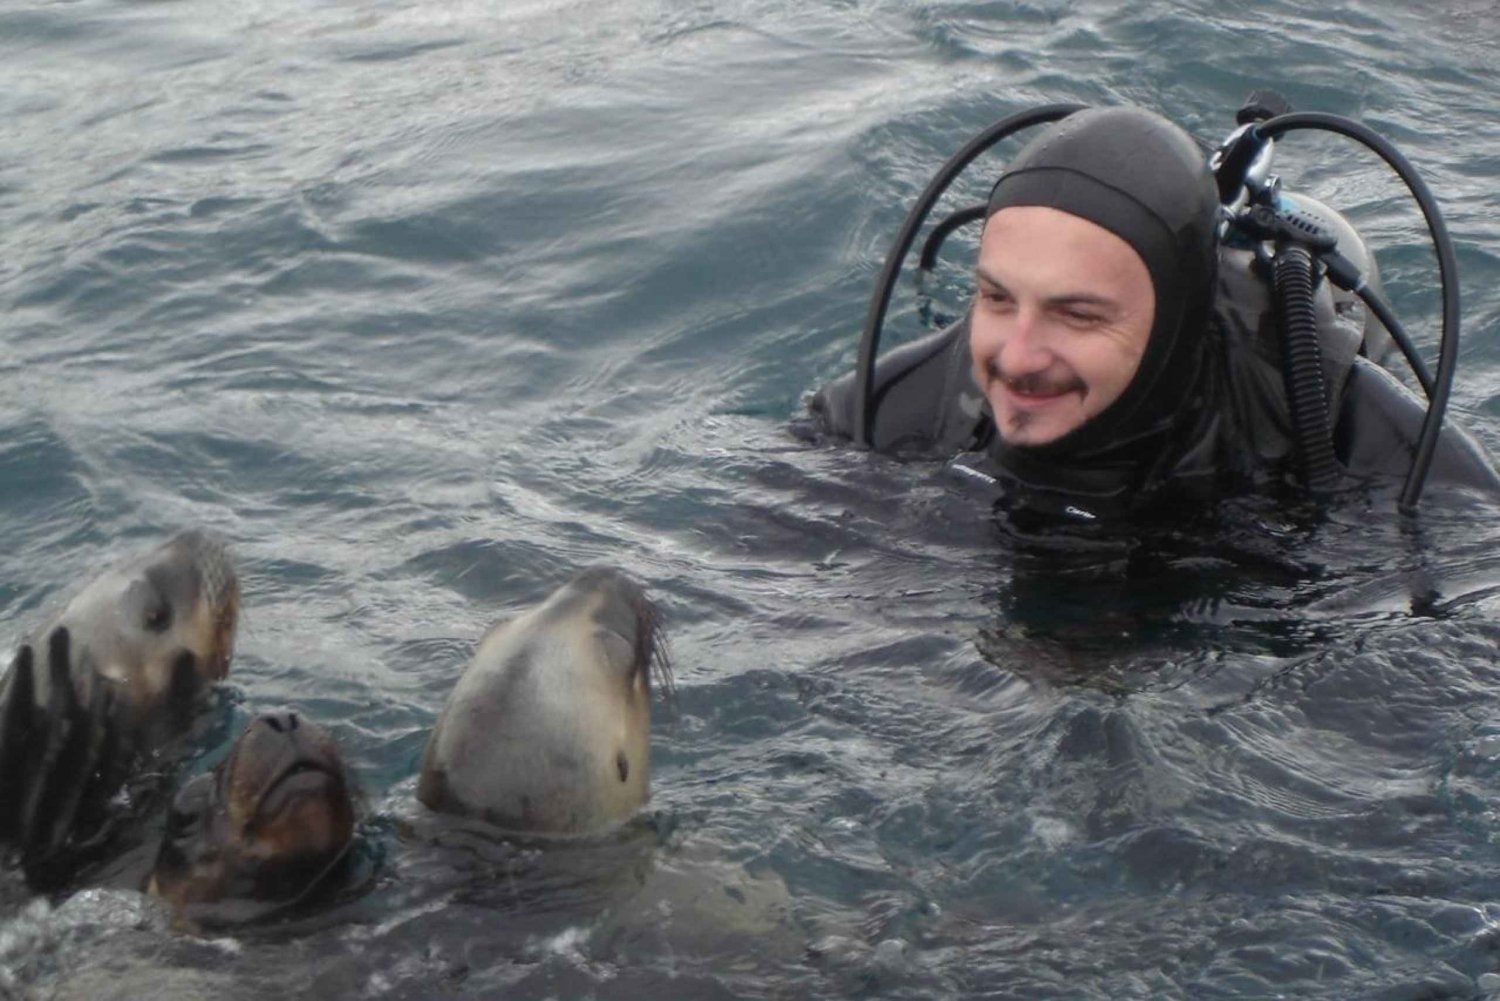 Puerto Madryn: Scuba Dive or Snorkeling with Sea Lions